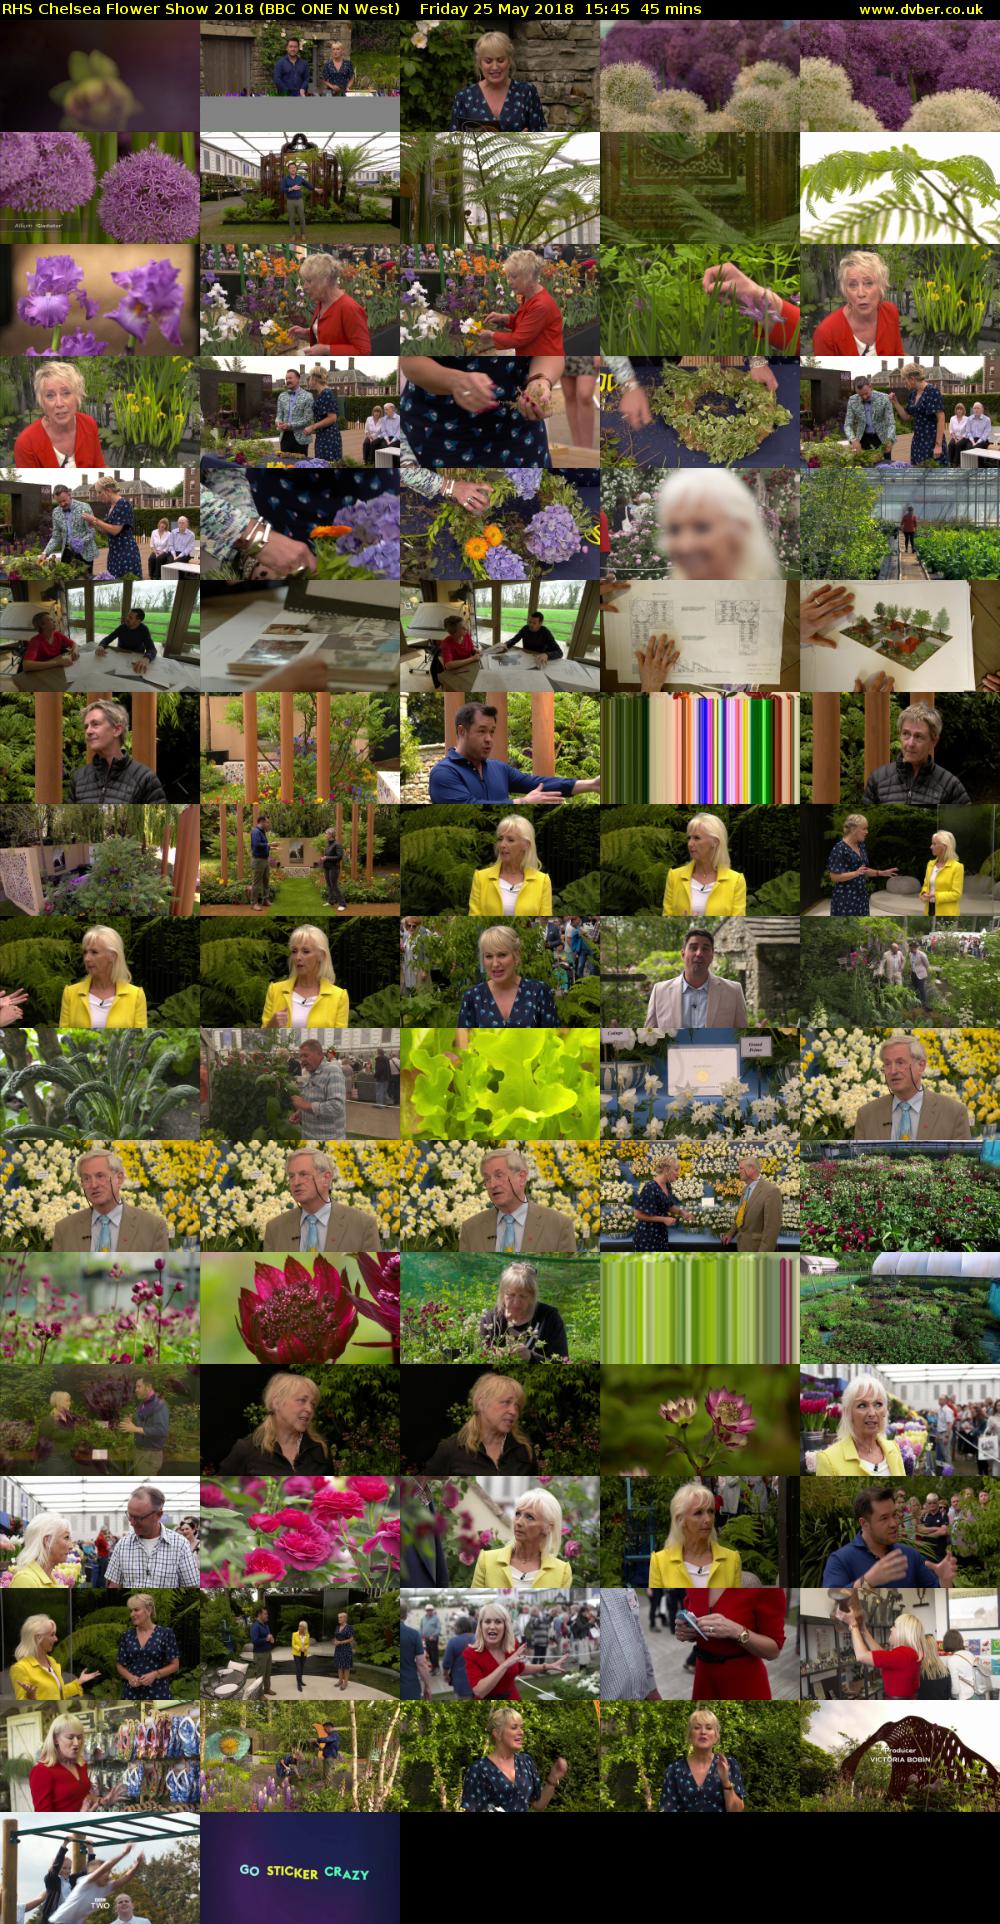 RHS Chelsea Flower Show 2018 (BBC ONE N West) Friday 25 May 2018 15:45 - 16:30